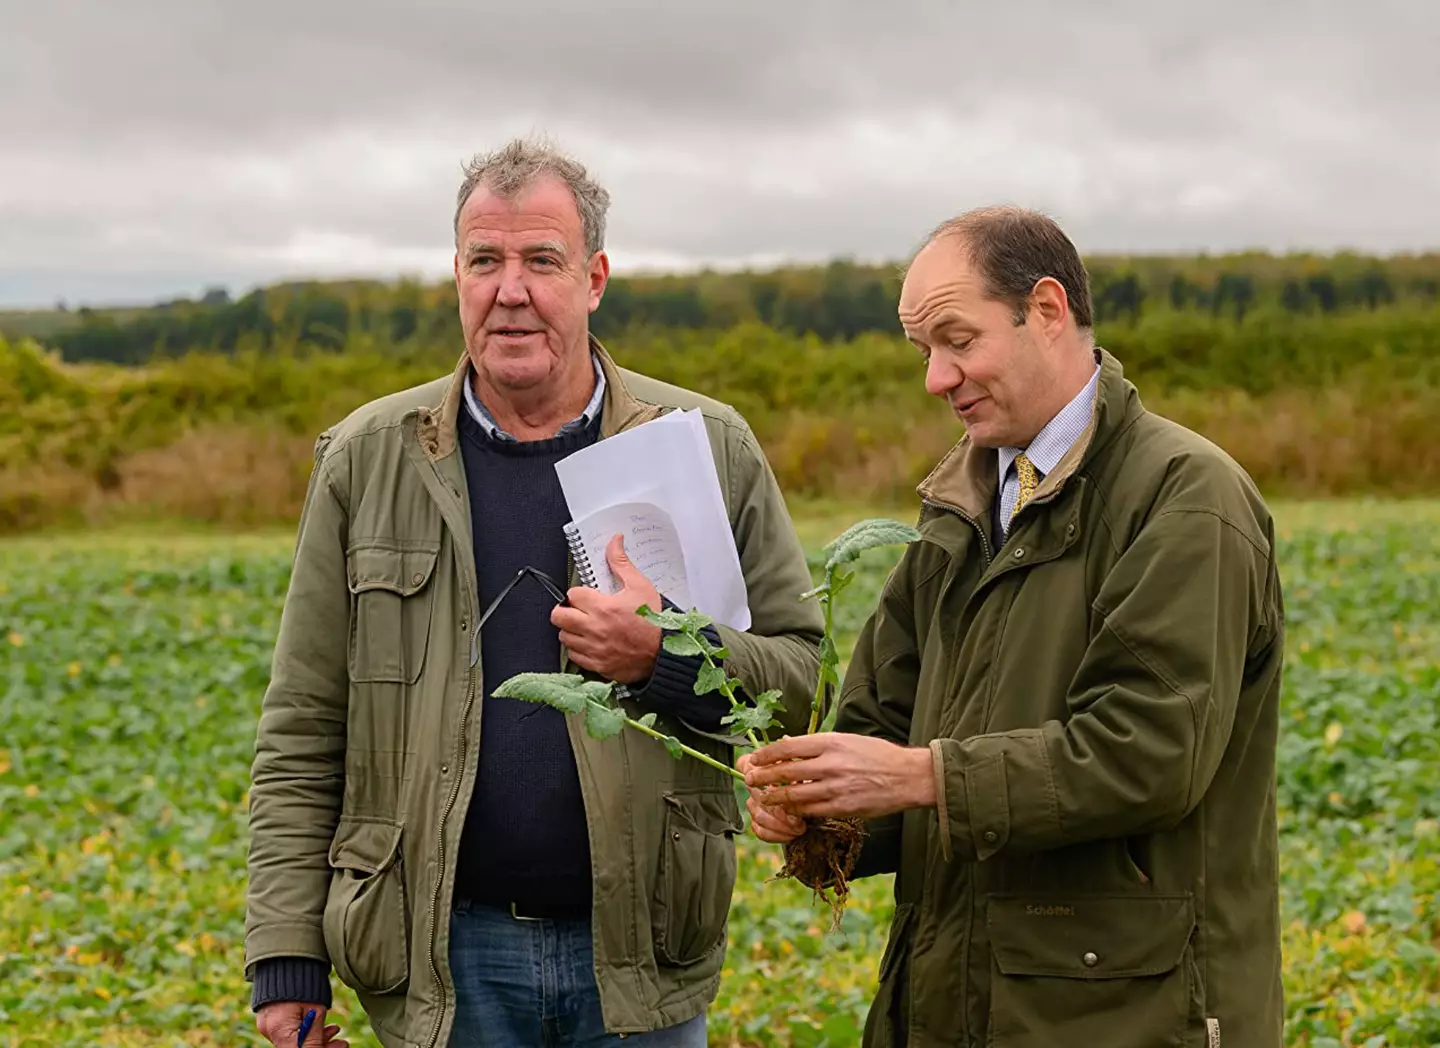 Jeremy Clarkson has worked closely with land agent and advisor Charlie Ireland to find ways around running his restaurant.